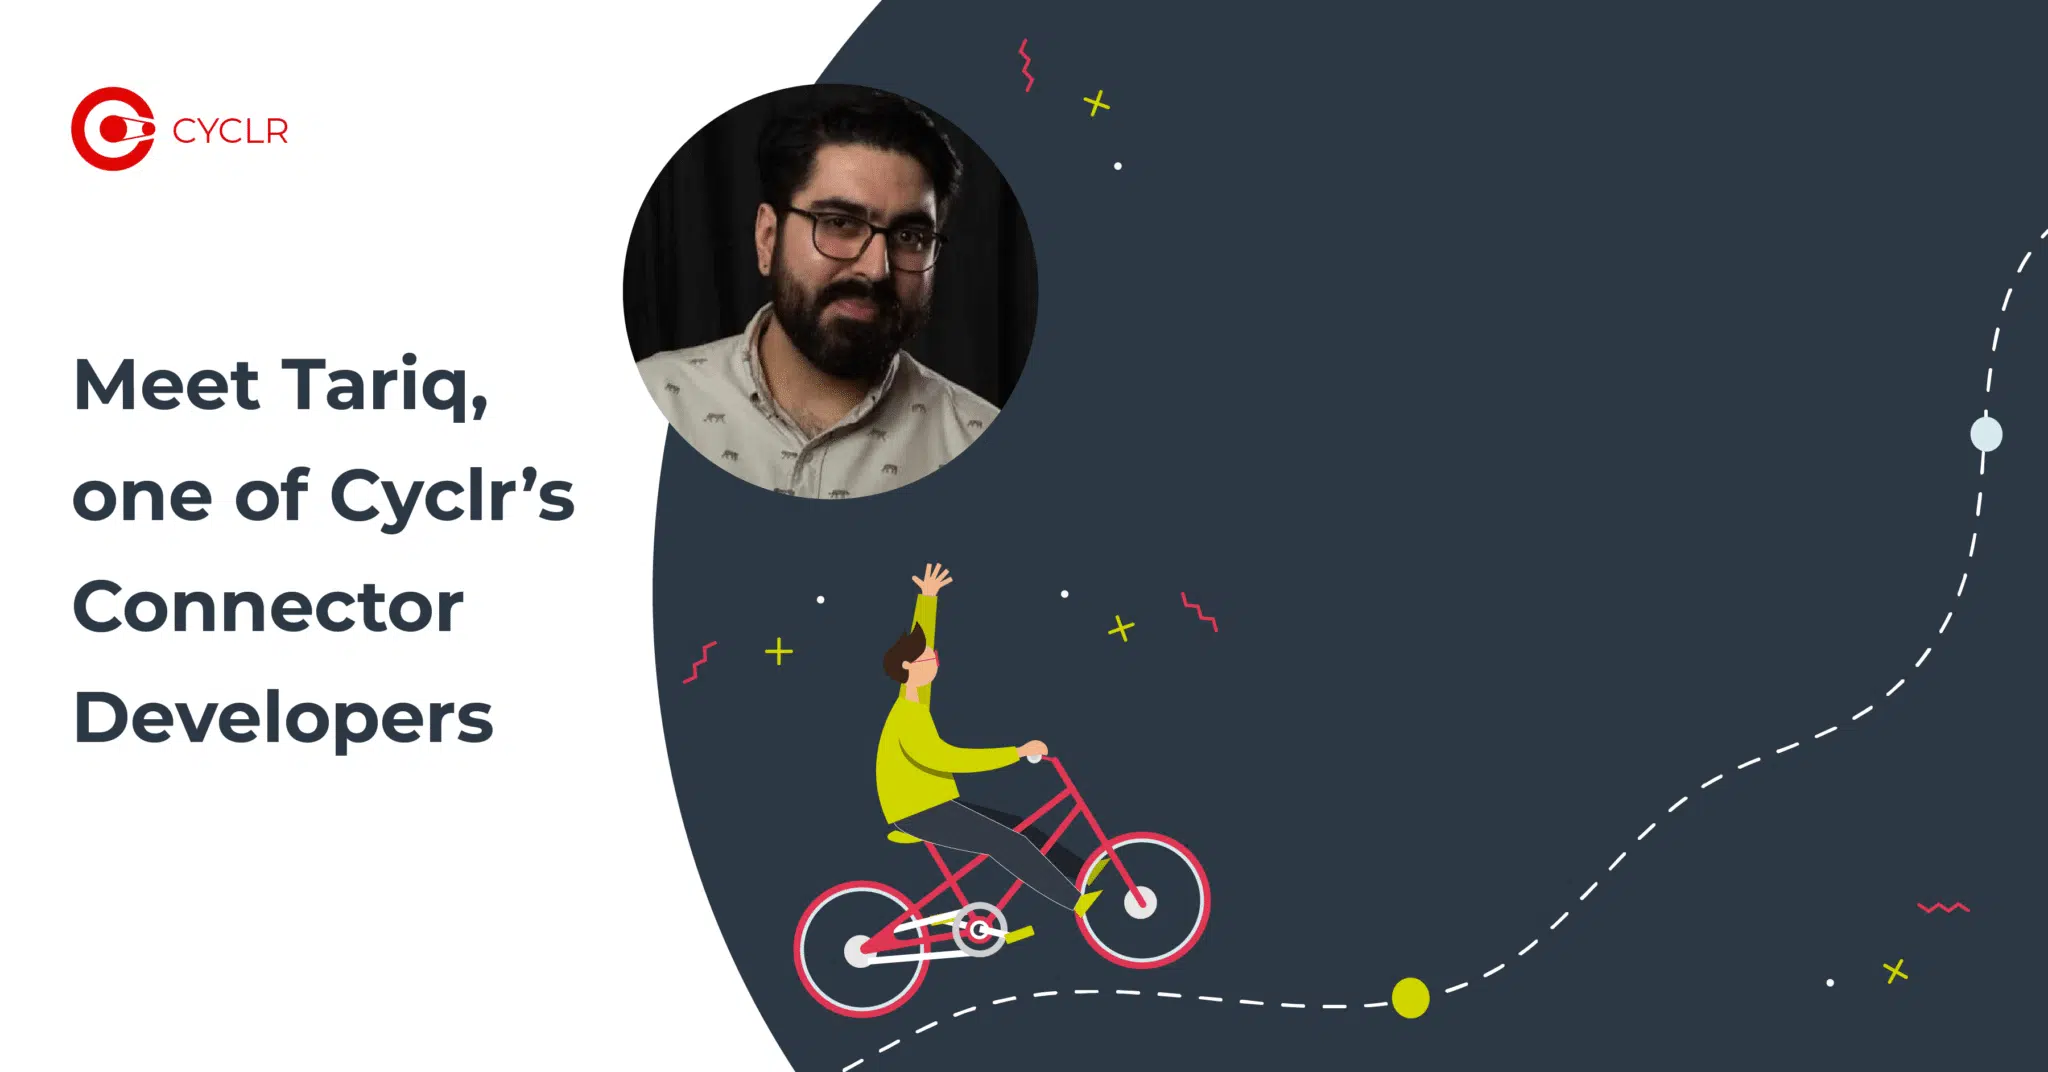 Meet Tariq, one of Cyclr's Connector Developers